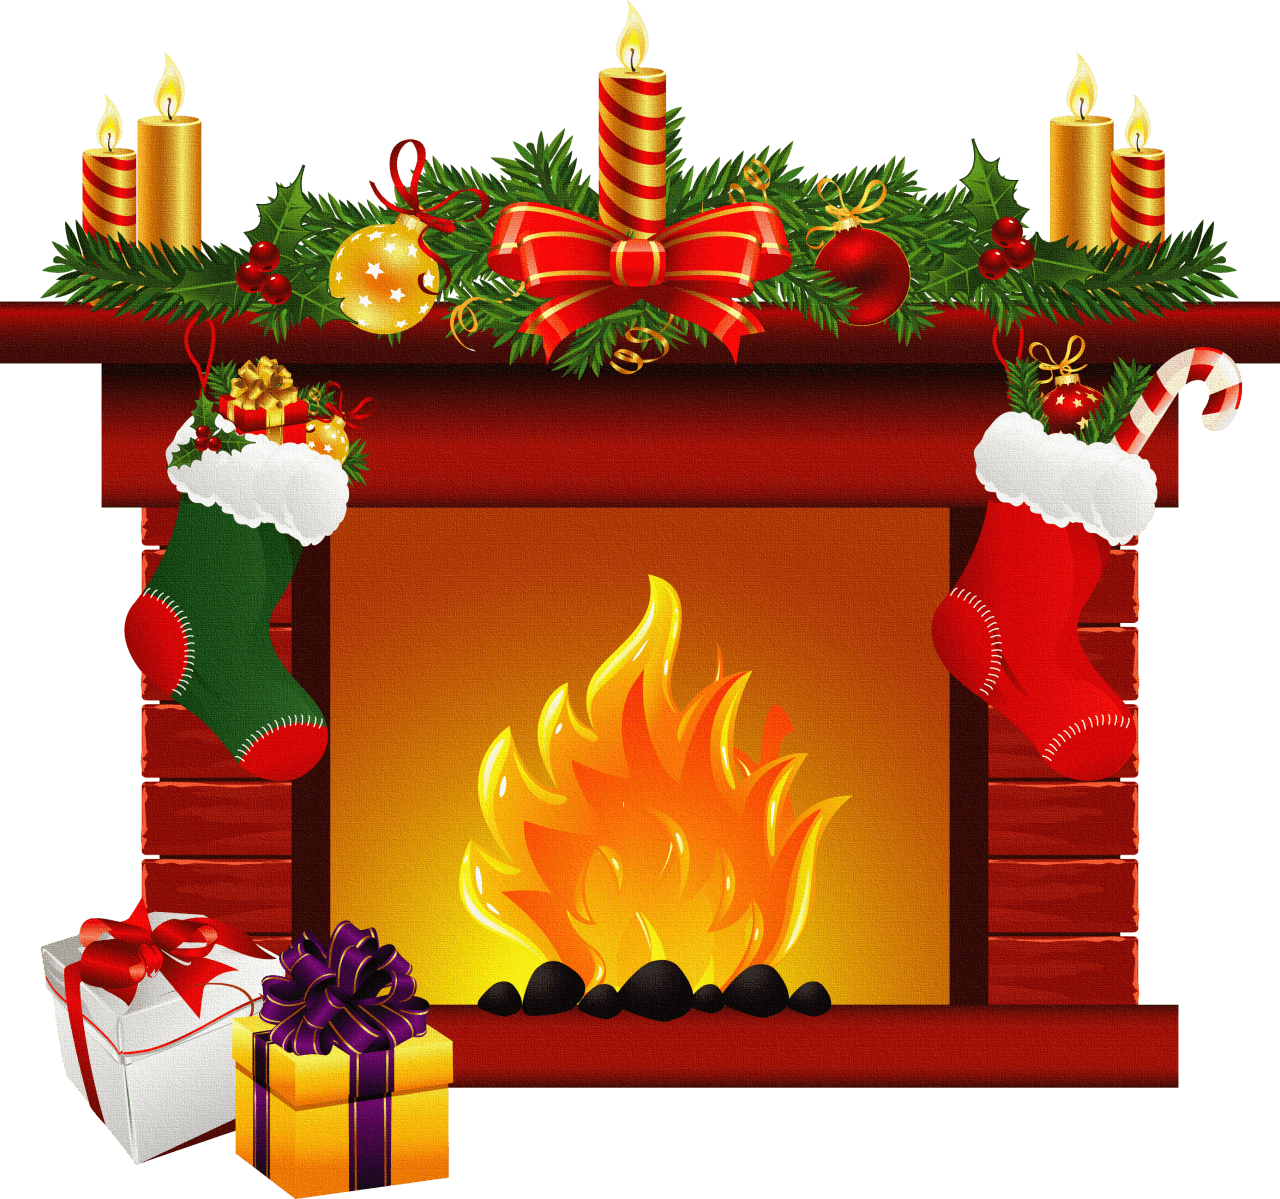 Fireplace clipart holiday, Fireplace holiday Transparent FREE for